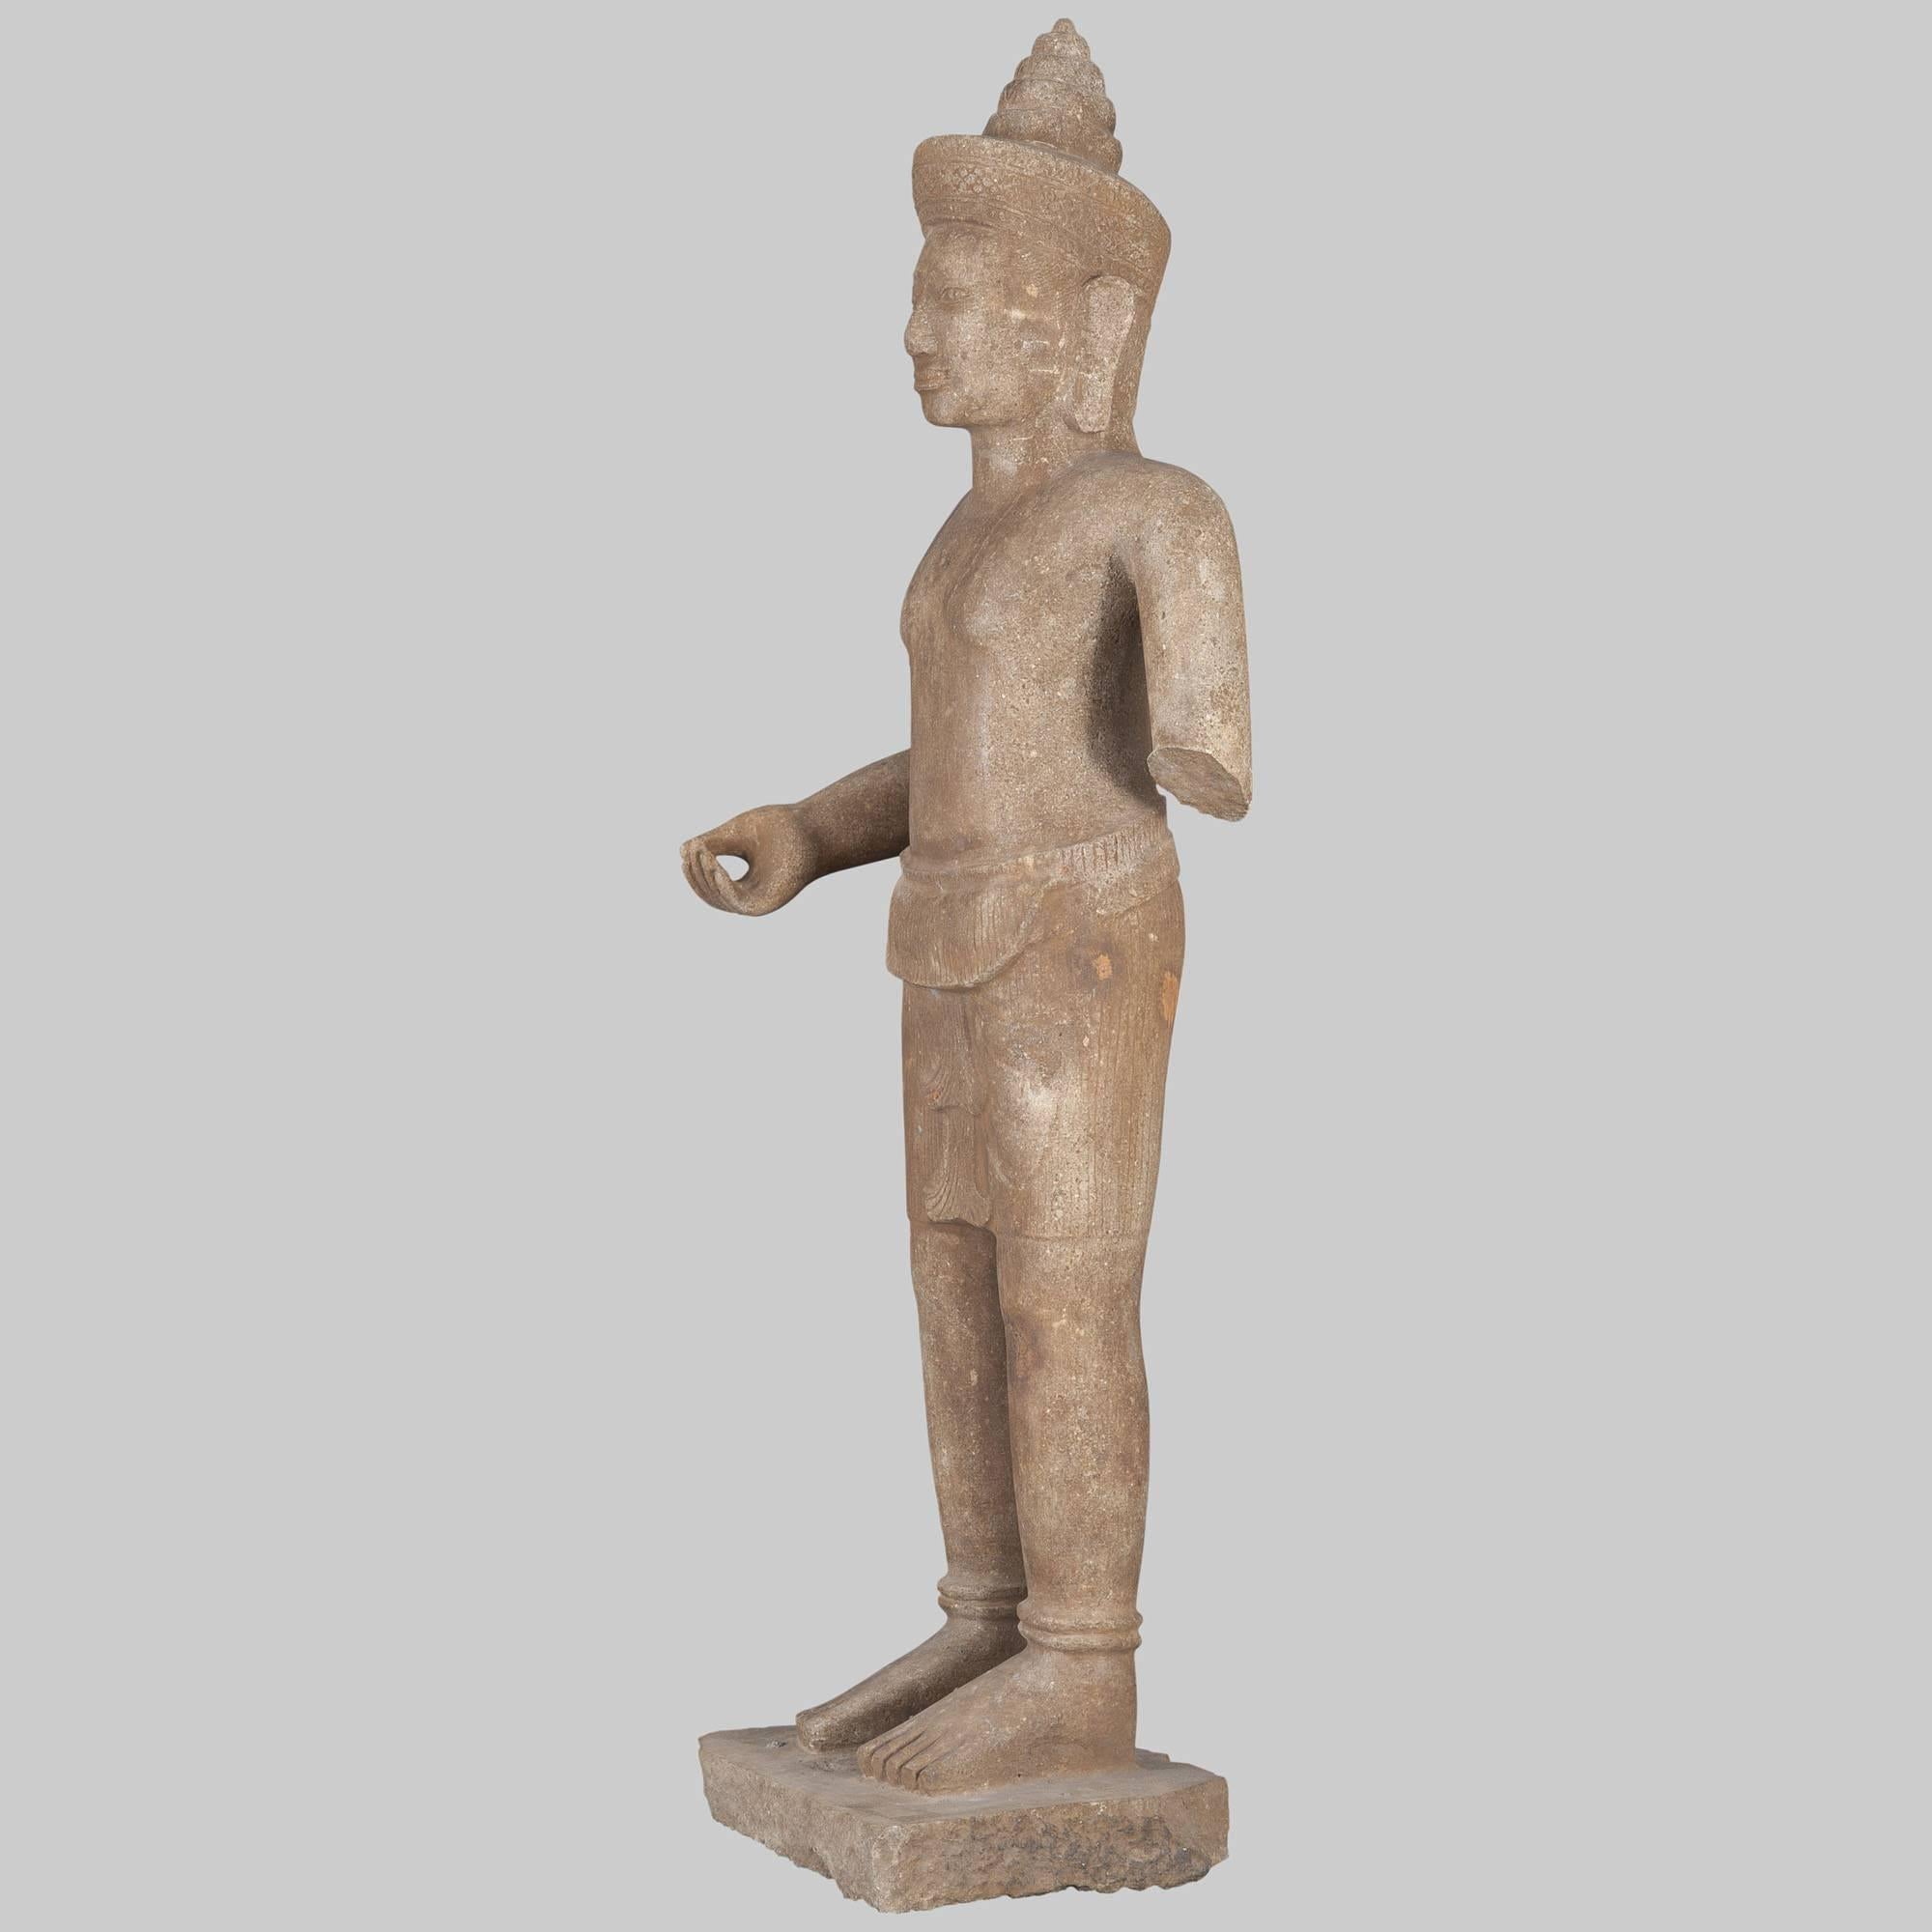 Sculpture represents Shiva, the creator and destroyer of the world.
A subject beloved by the sculptors of the Champa dynasty, one can recognize Shiva by the tall chignon hairstyle the simple dress, posture according with Vietnamese tradition